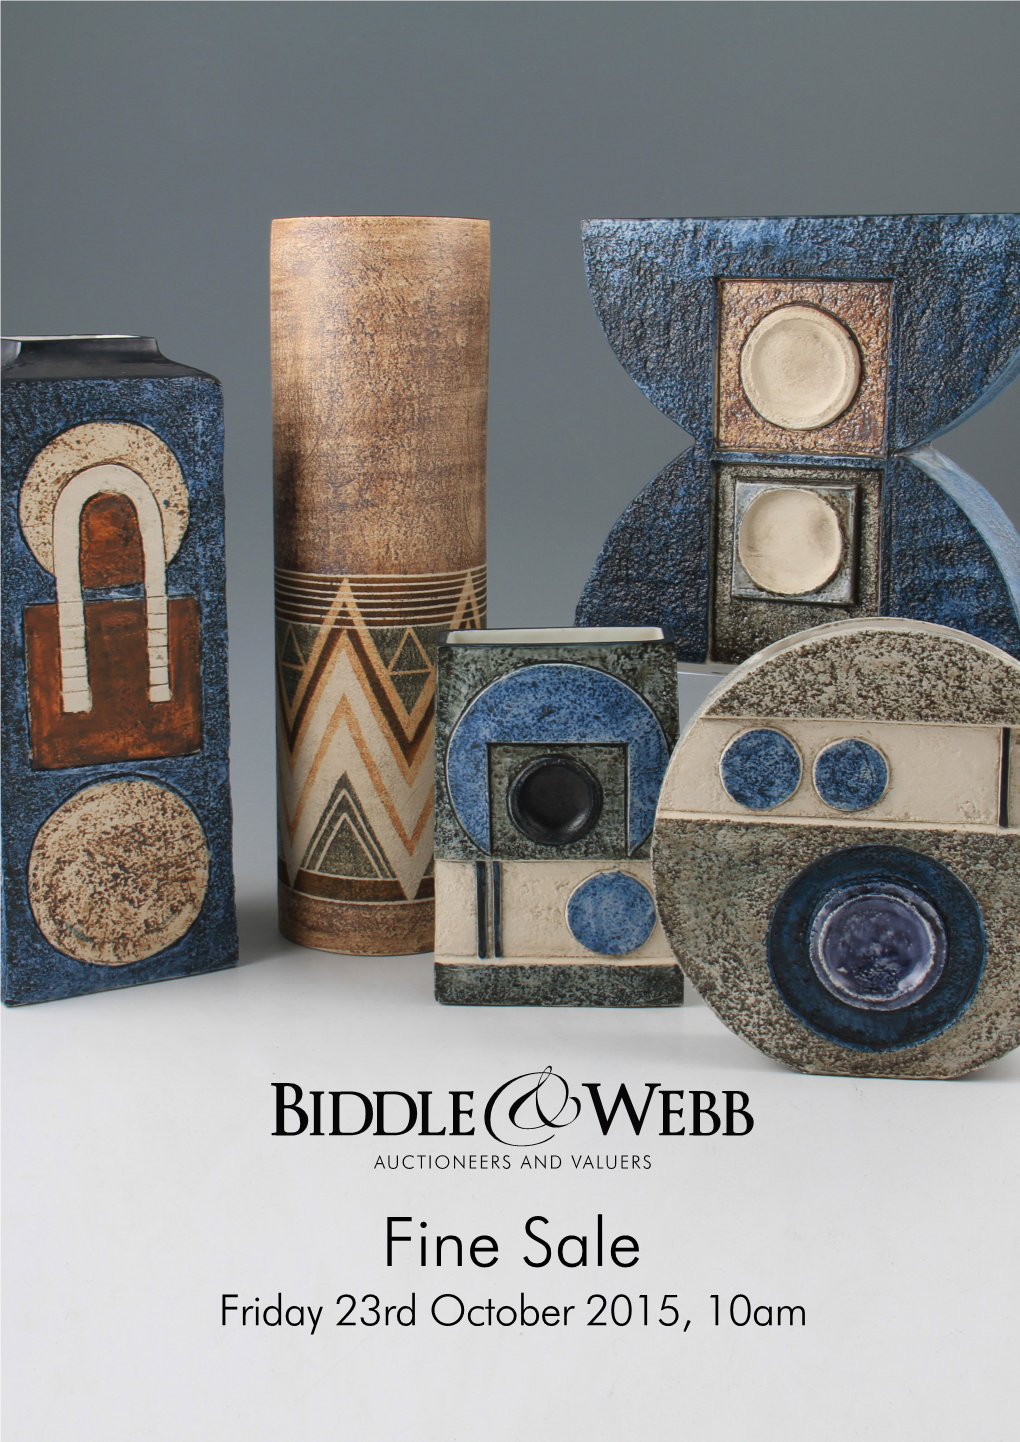 Fine Sale Friday 23Rd October 2015, 10Am Welcome to Biddle & Webb Auctioneers and Valuers